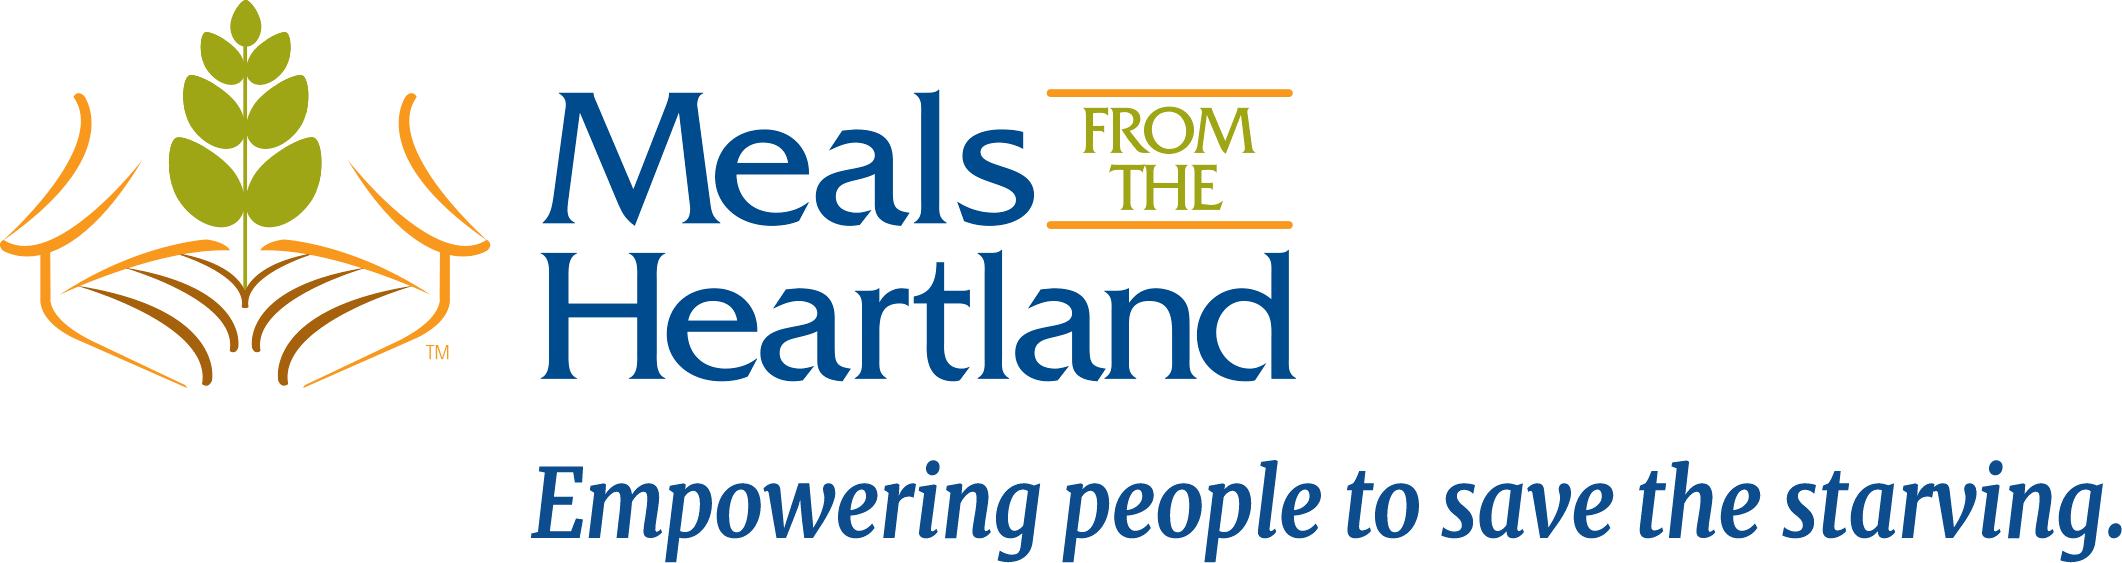 Heartland Logo - Meals from the Heartland Logo with Tagline (4x) - Meals from the ...